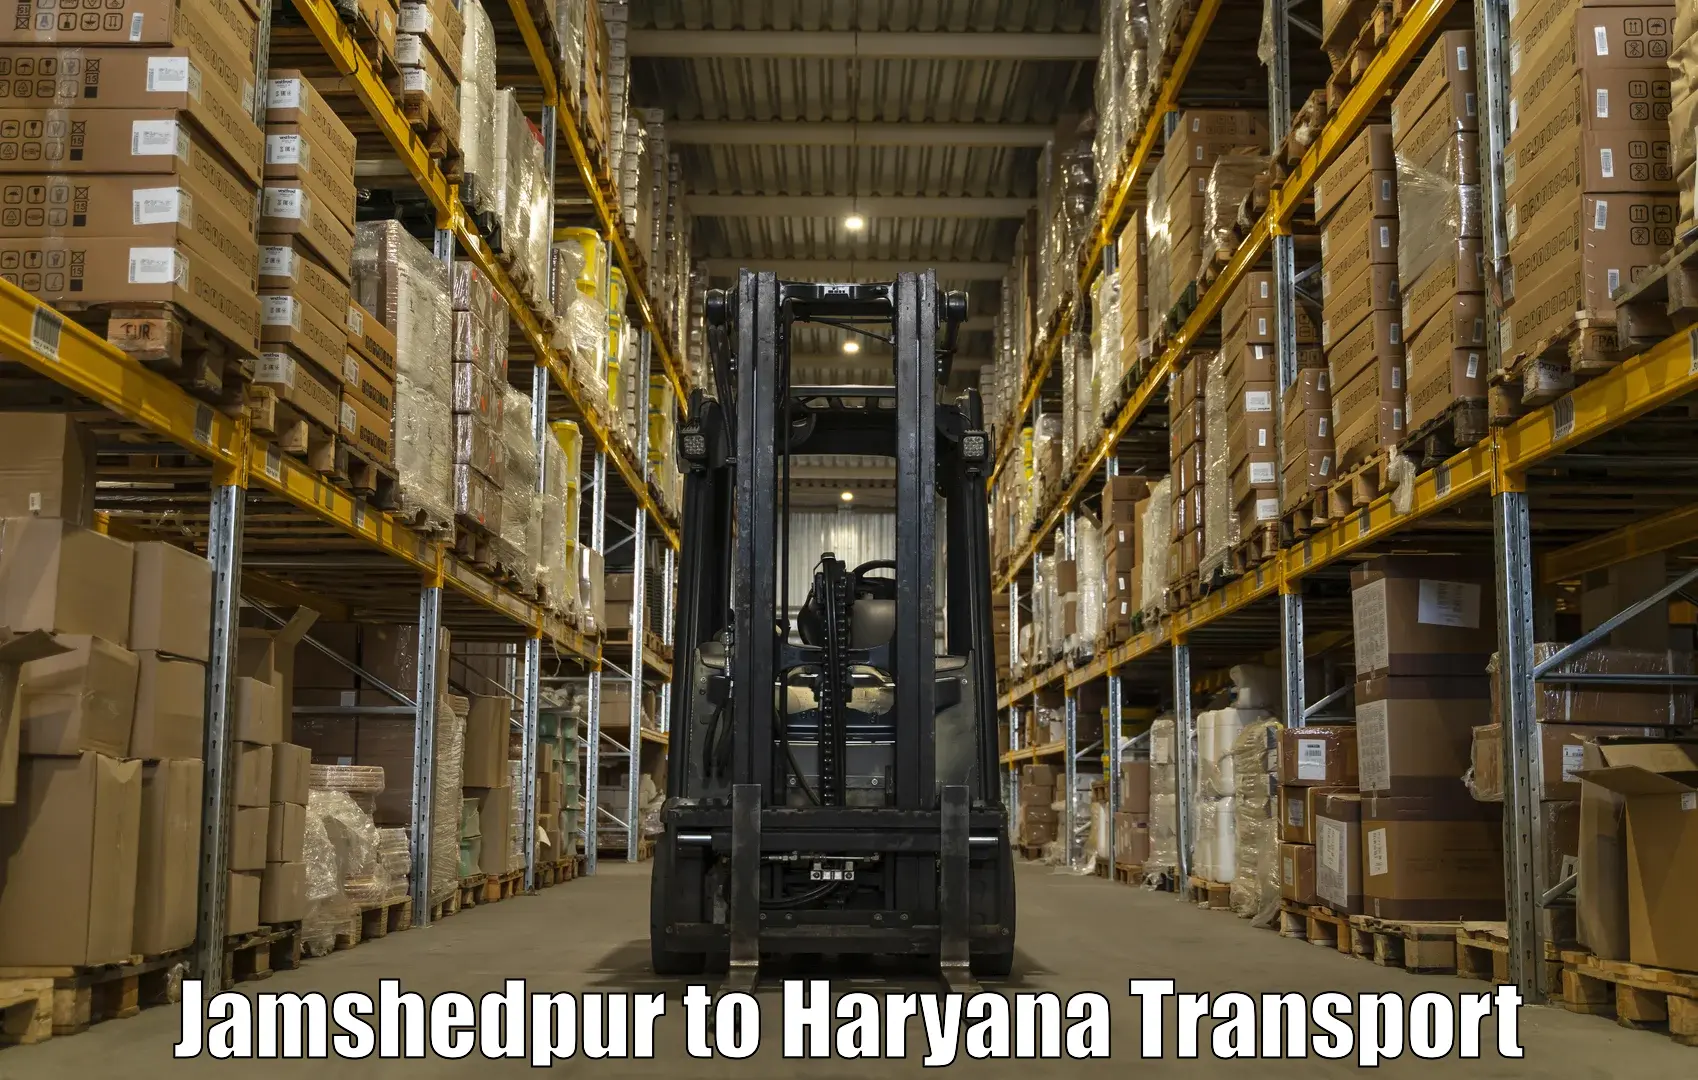 Transport in sharing Jamshedpur to Bhuna